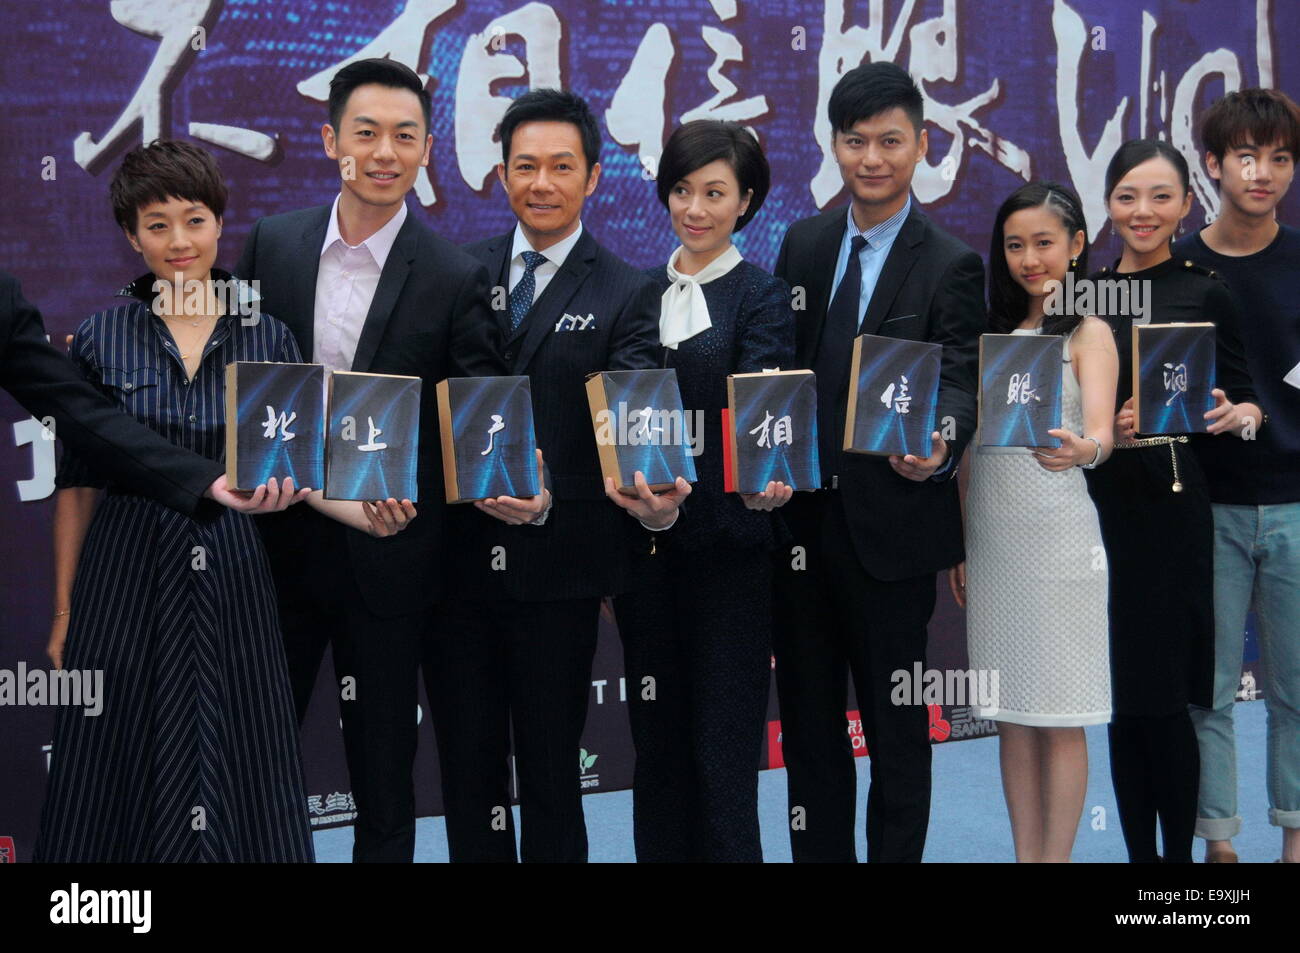 Ma Yili attends the promote conference for her new TV drama in Shanghai, China on 3th November, 2014. Stock Photo